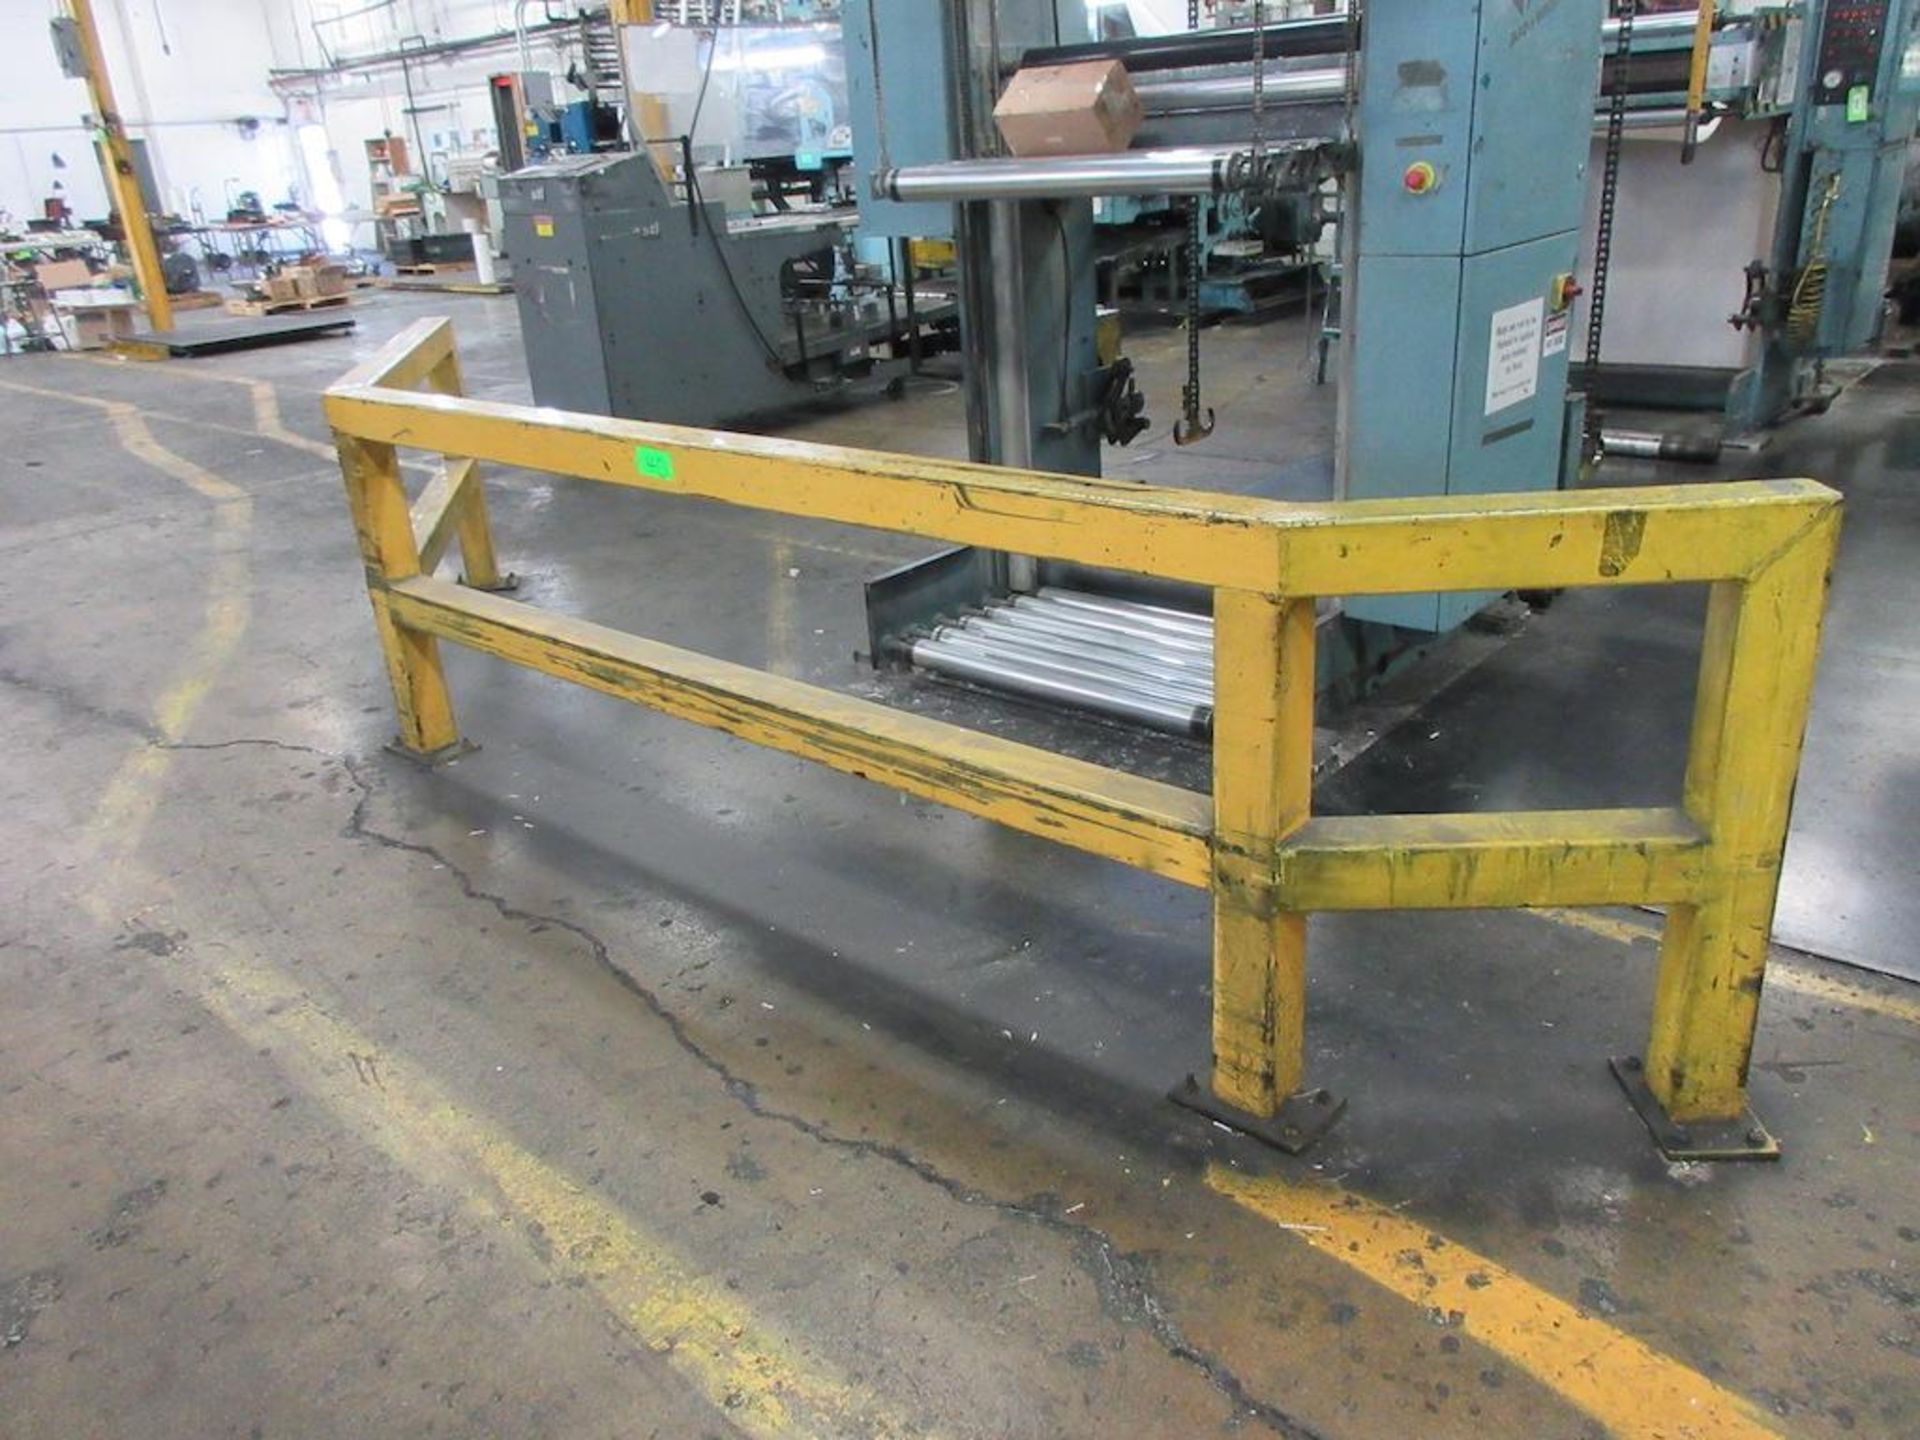 Lot approx 19 steel floor plates 5'x10'x'1/4", (2) 15' angled steel safety barriers - Image 5 of 6